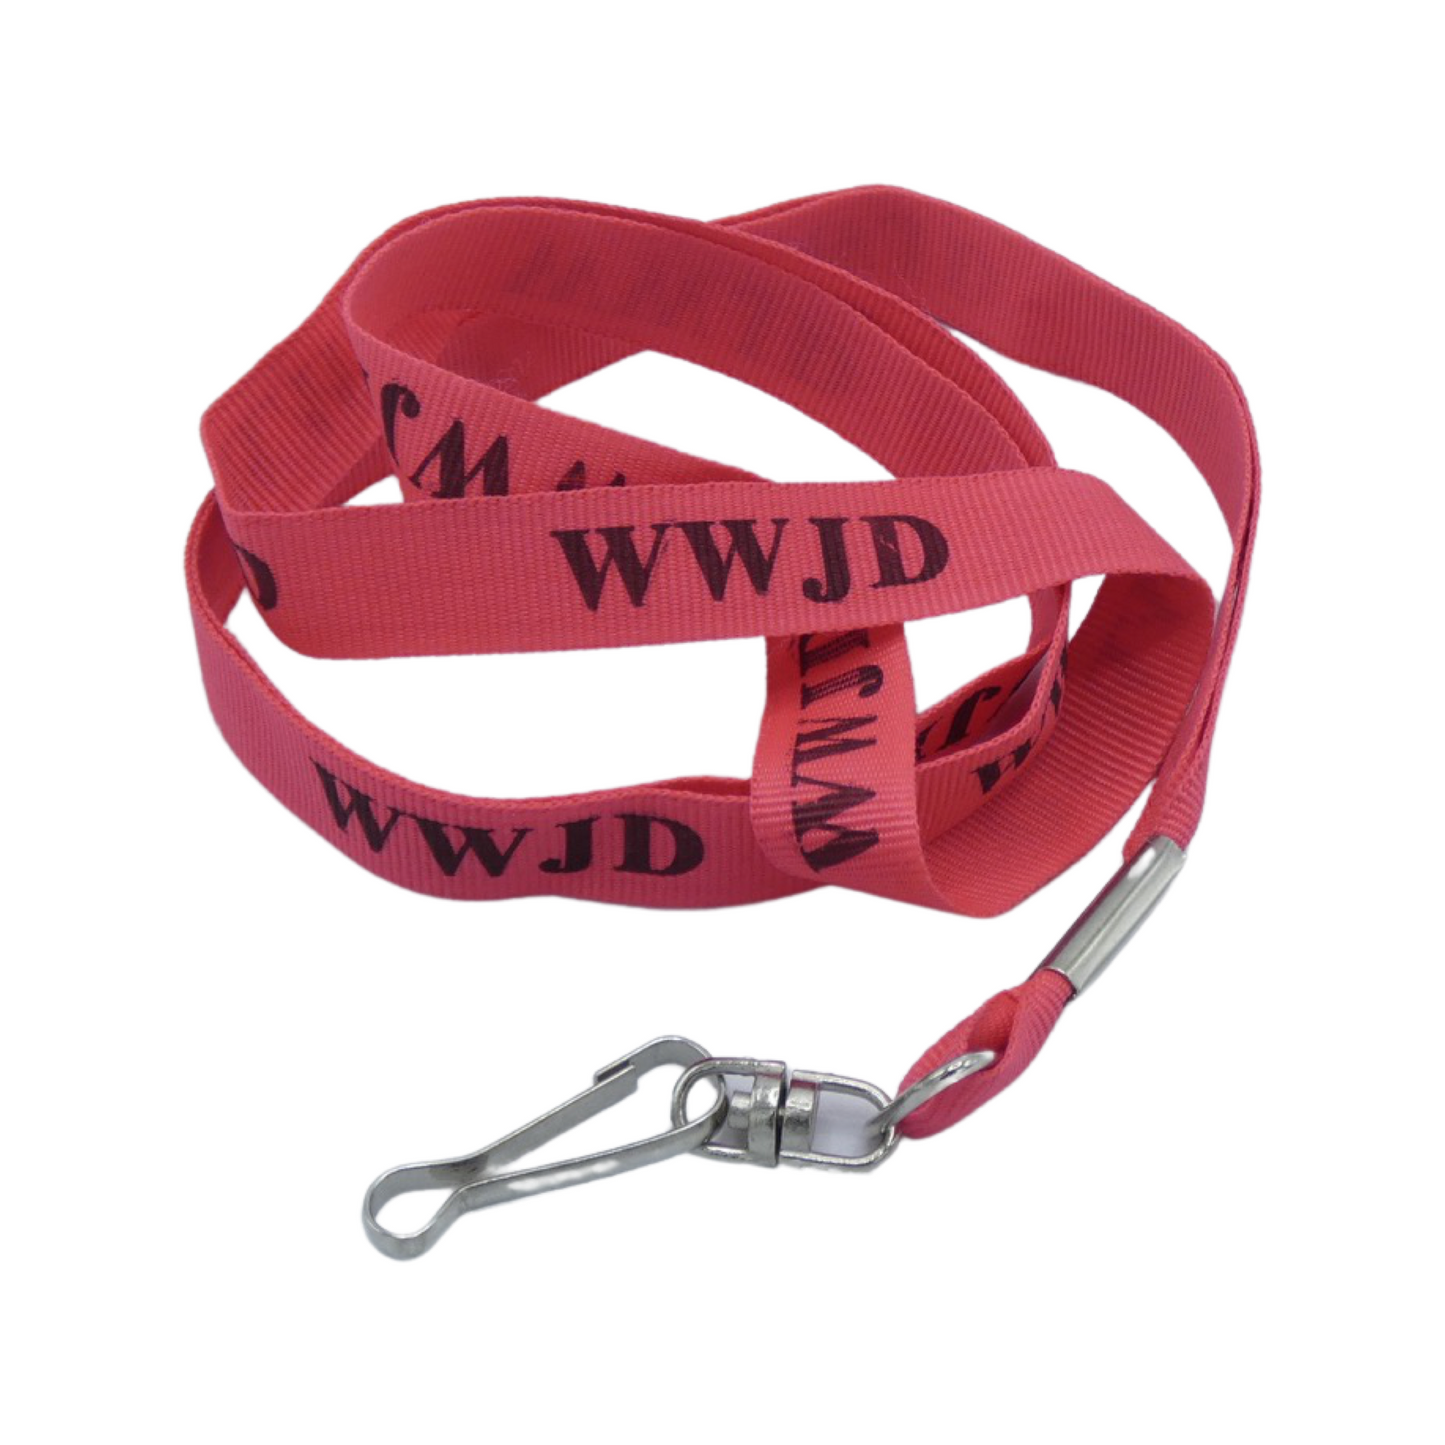 Assorted "What Would Jesus Do" (WWJD) Lanyards